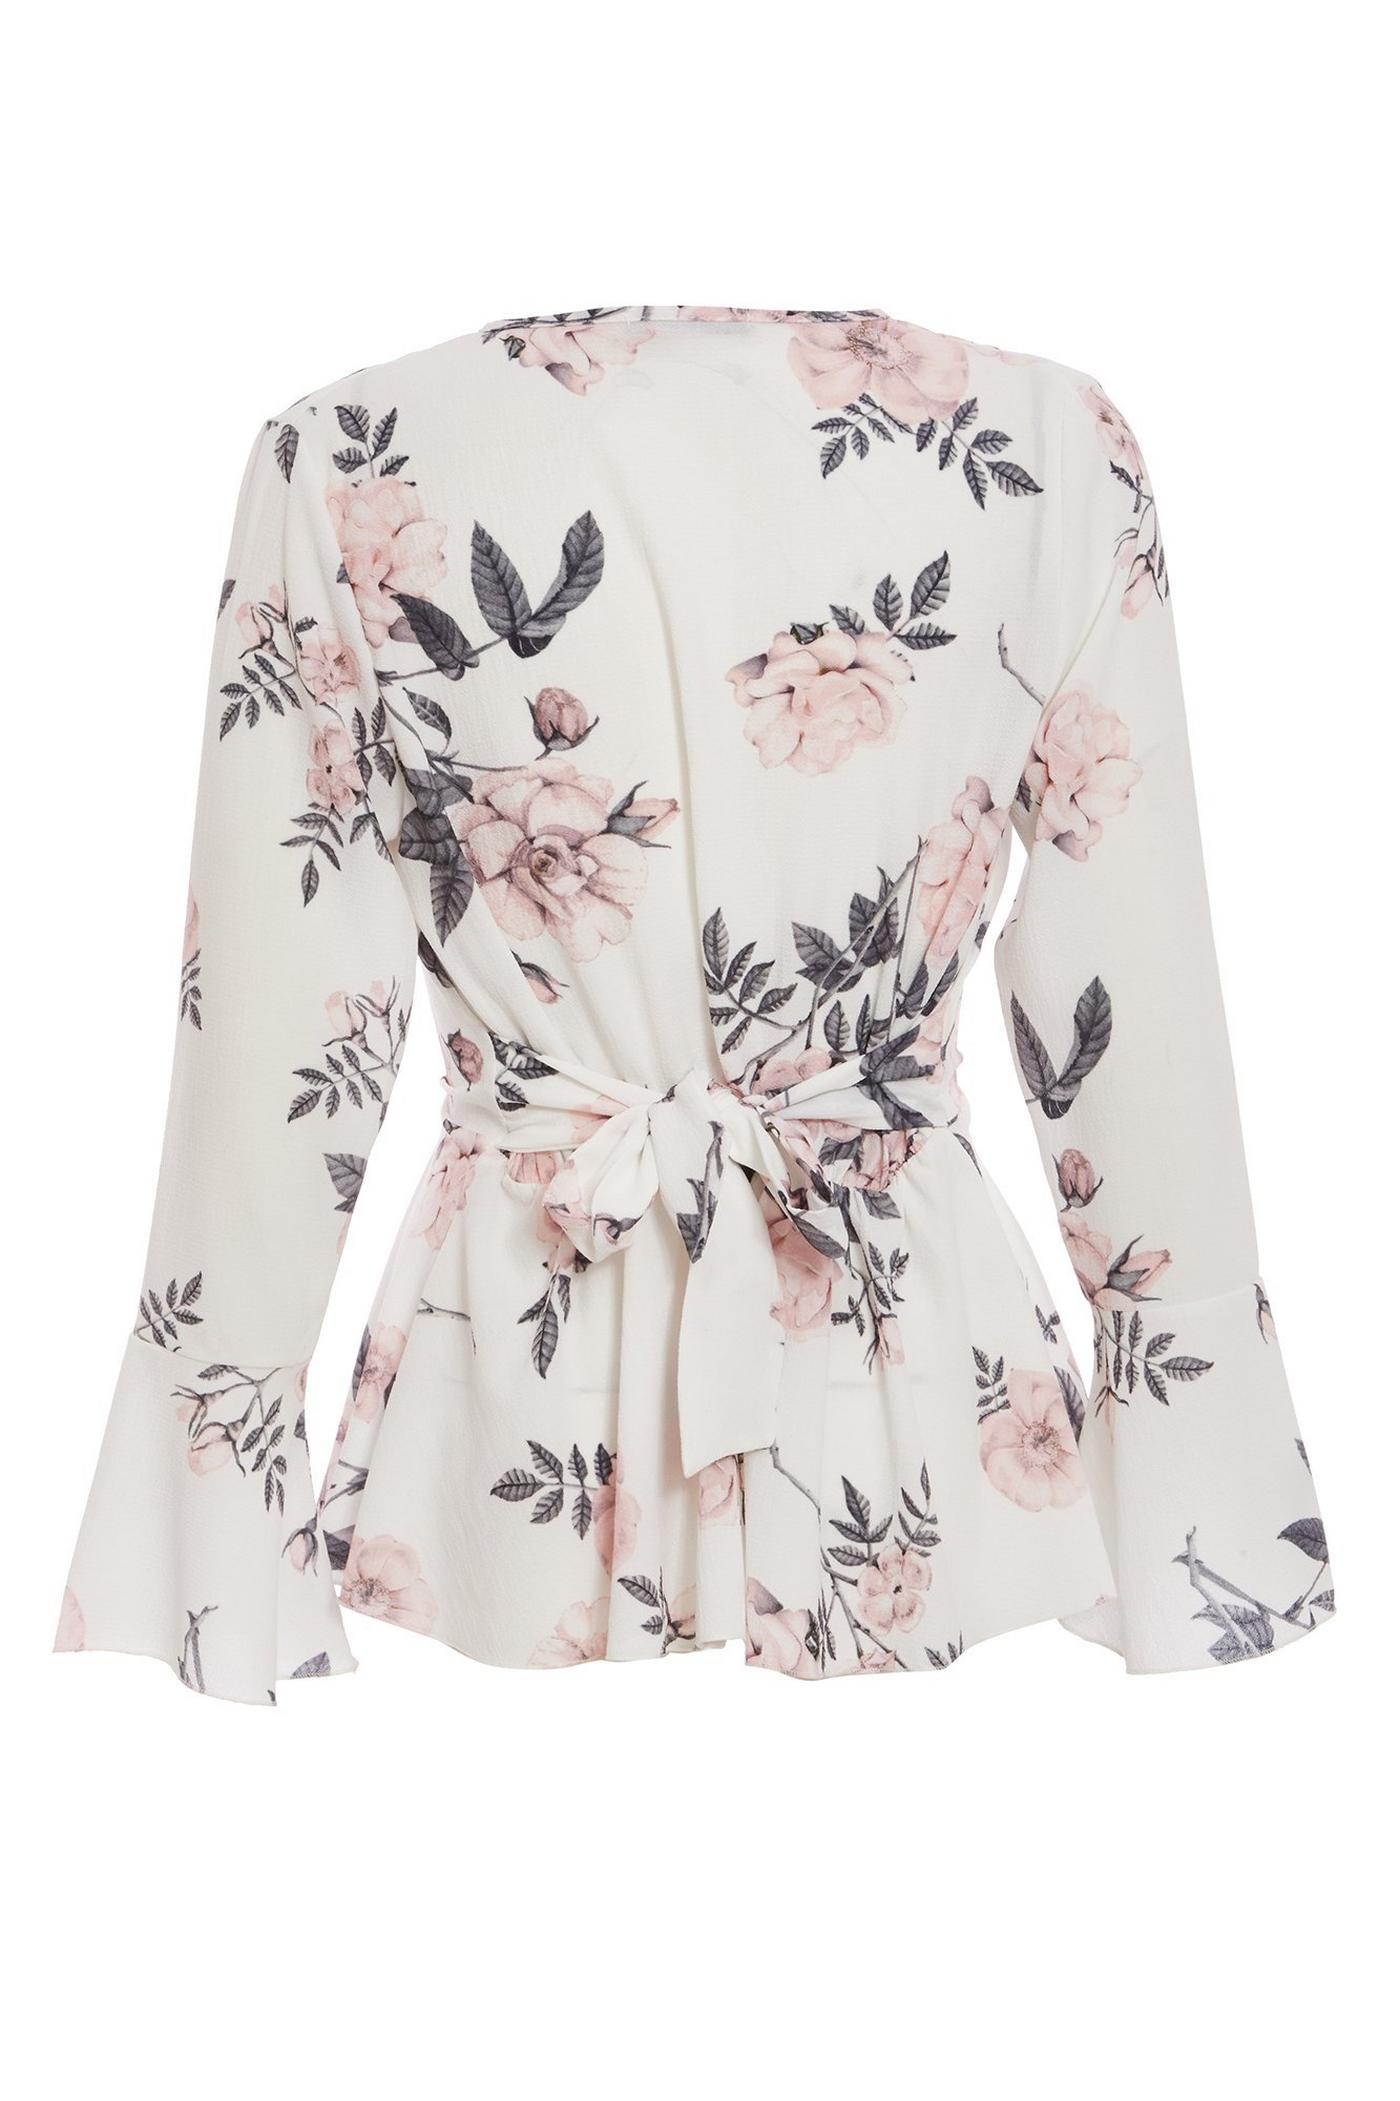 Cream and Pink Floral Long Sleeve Top